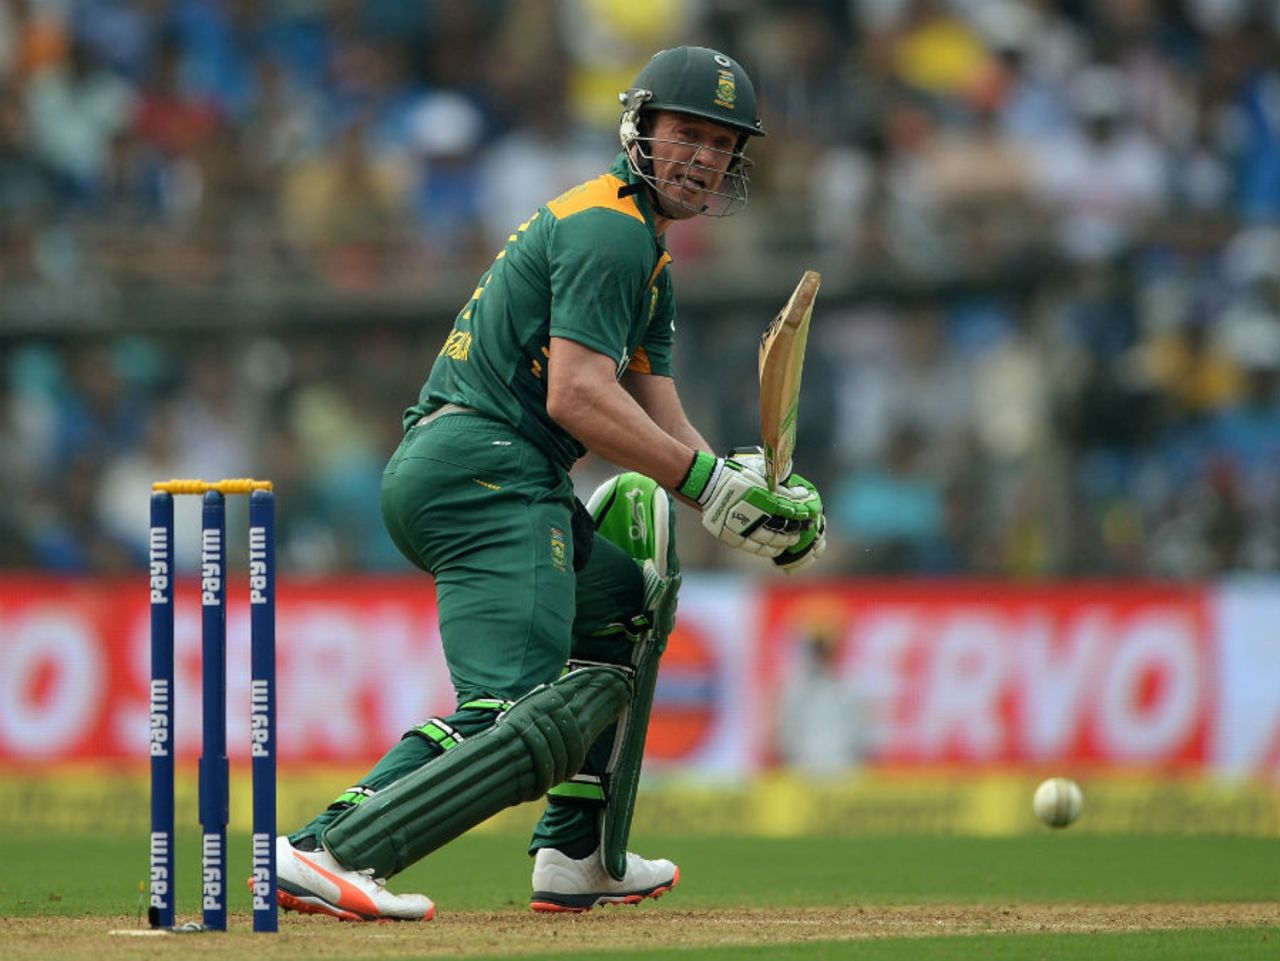 AB de Villiers steers one down to third man, India v South Africa, 5th ODI, Mumbai, October 25, 2015